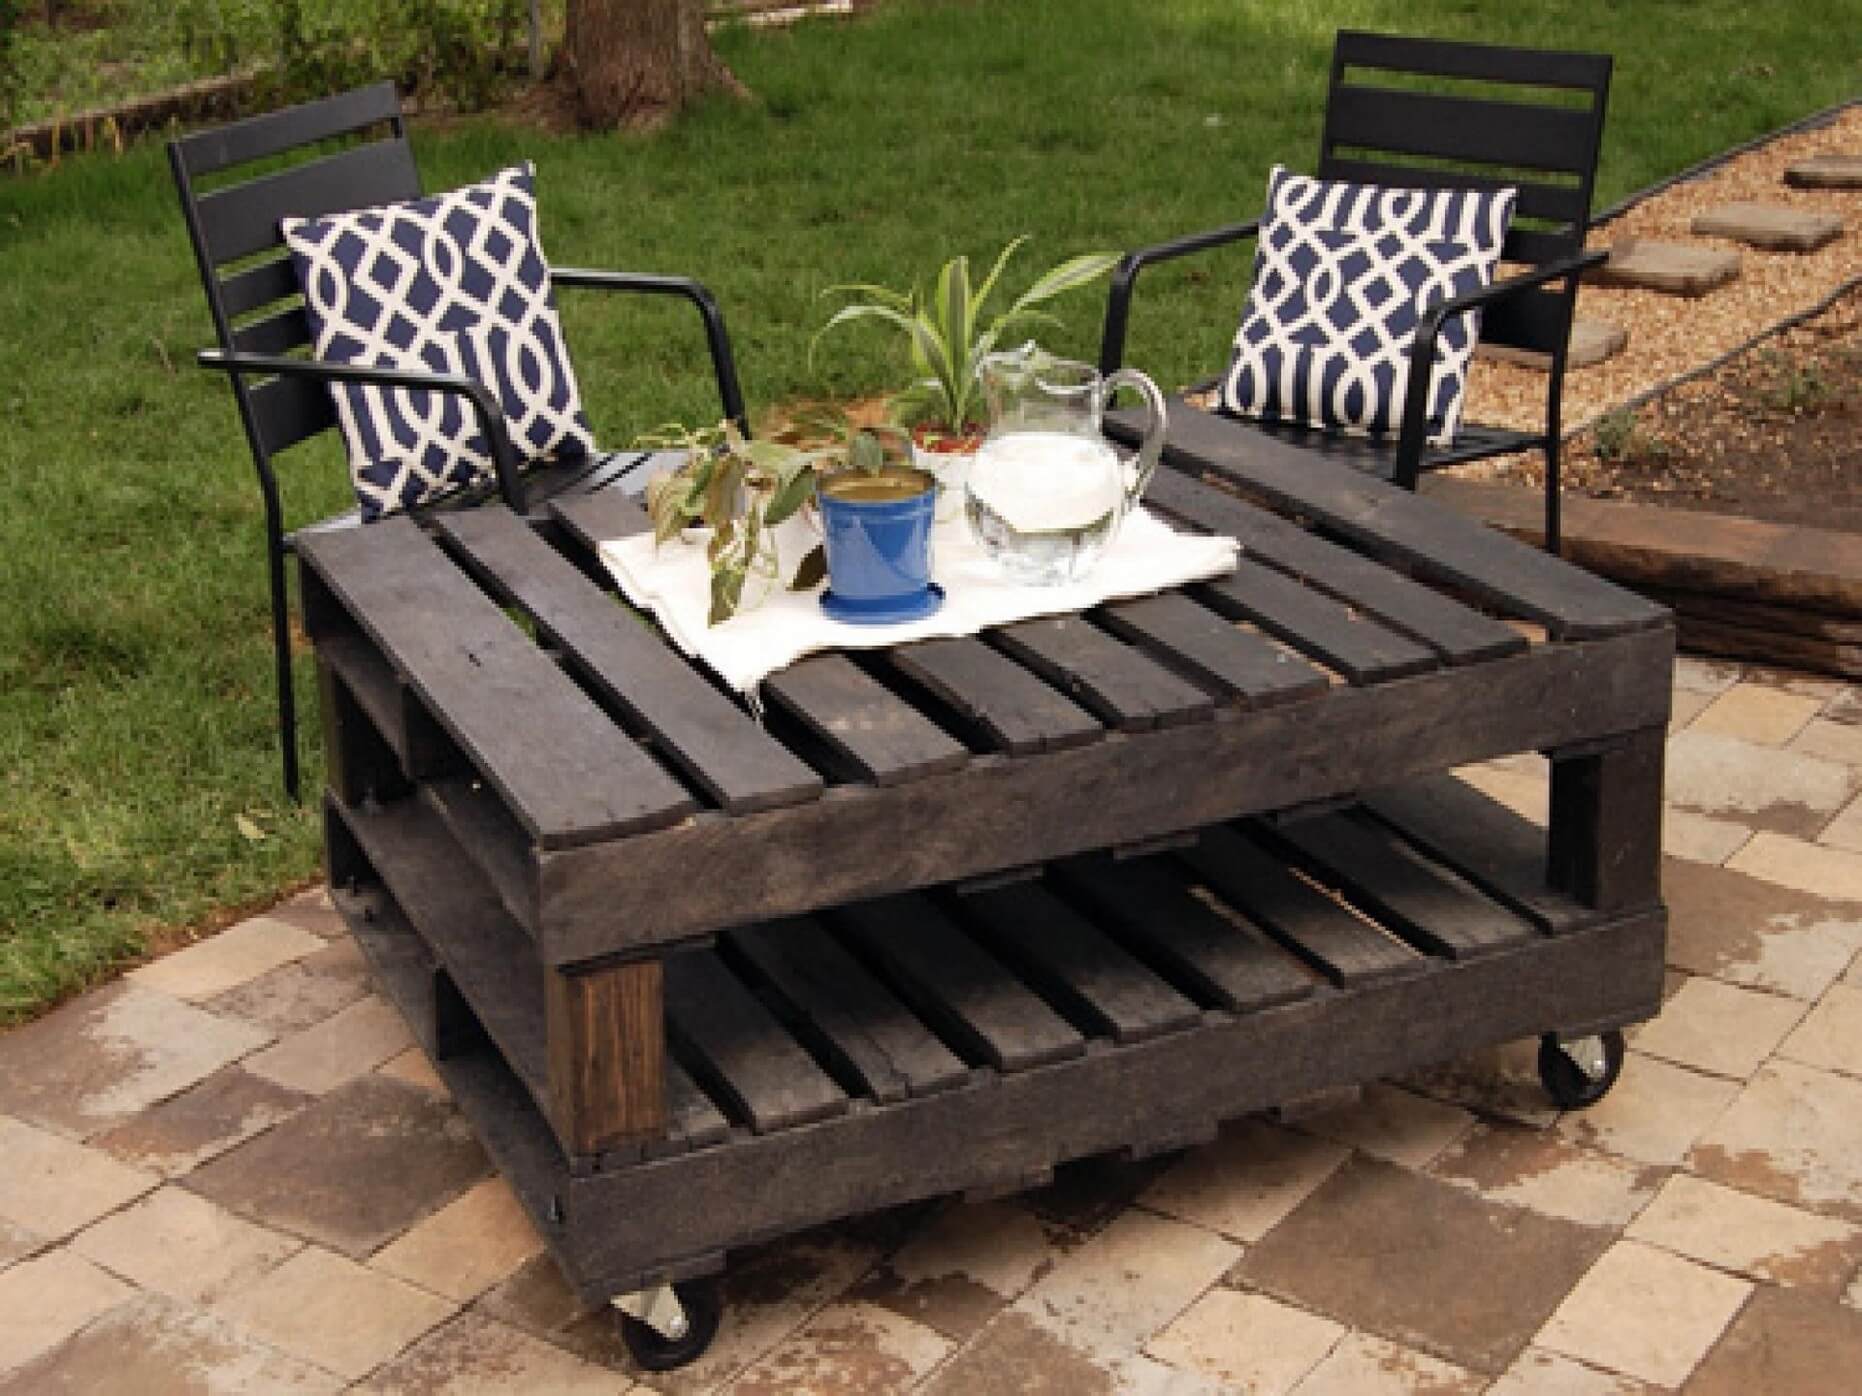 Wooden pallet furniture for a porch